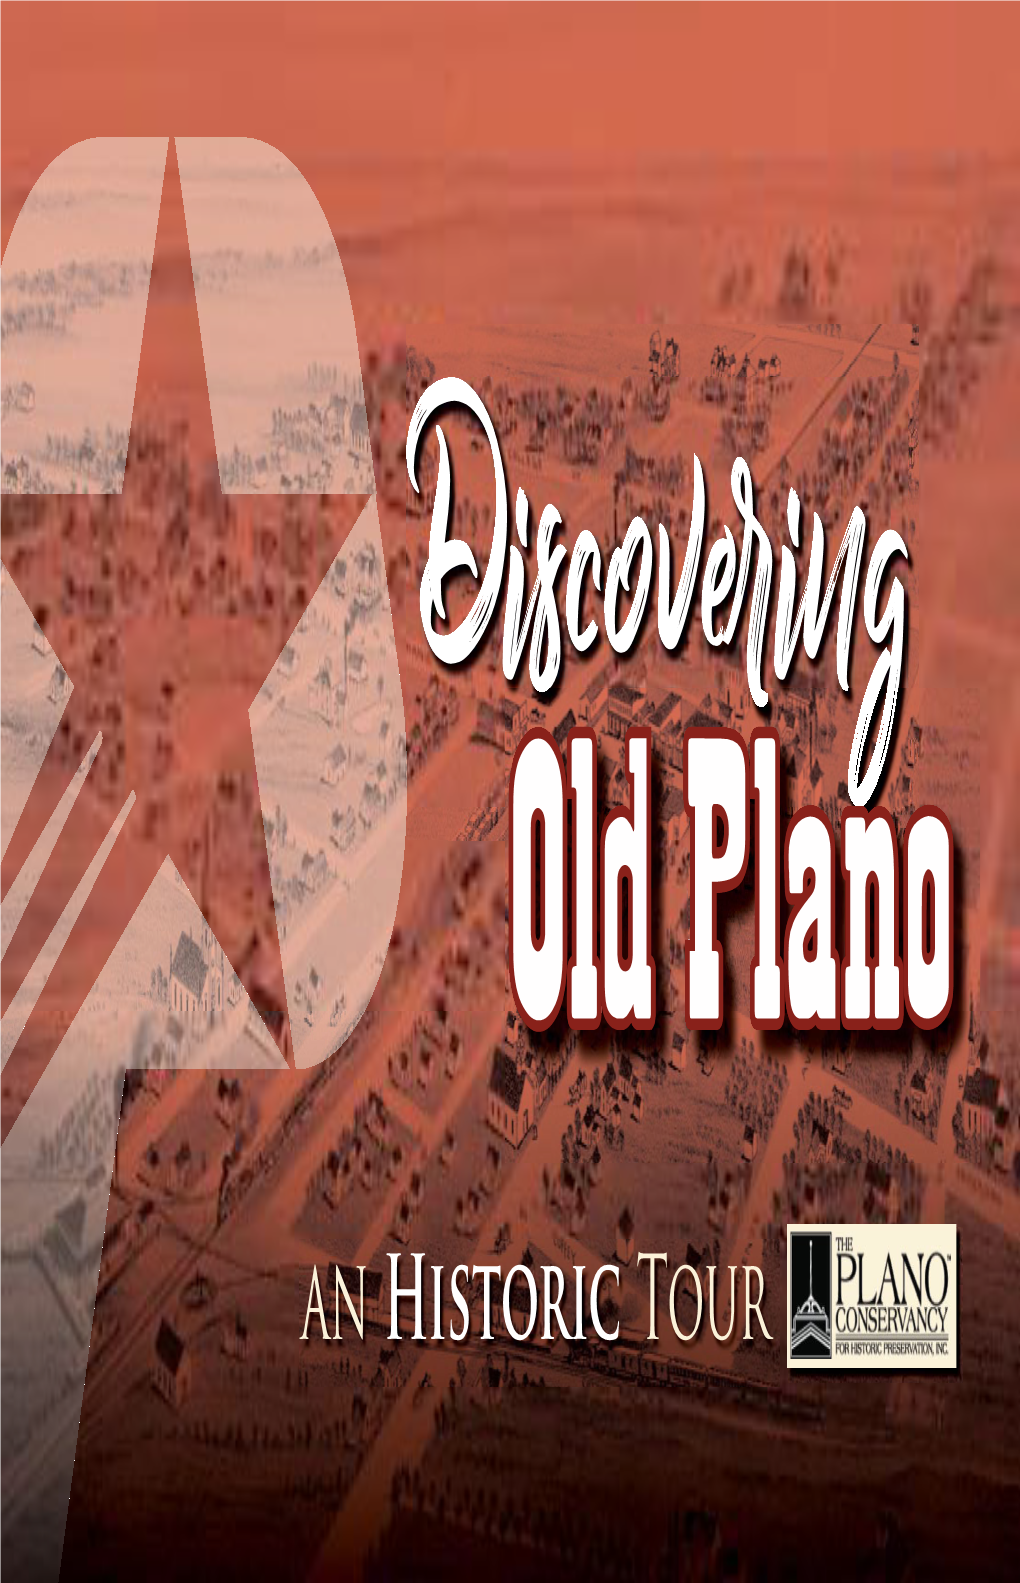 An Historic Tour Plano History About the Tour Landmark &Marker Types the Community of Plano Originated During the Early 1840S in the Republic of Texas